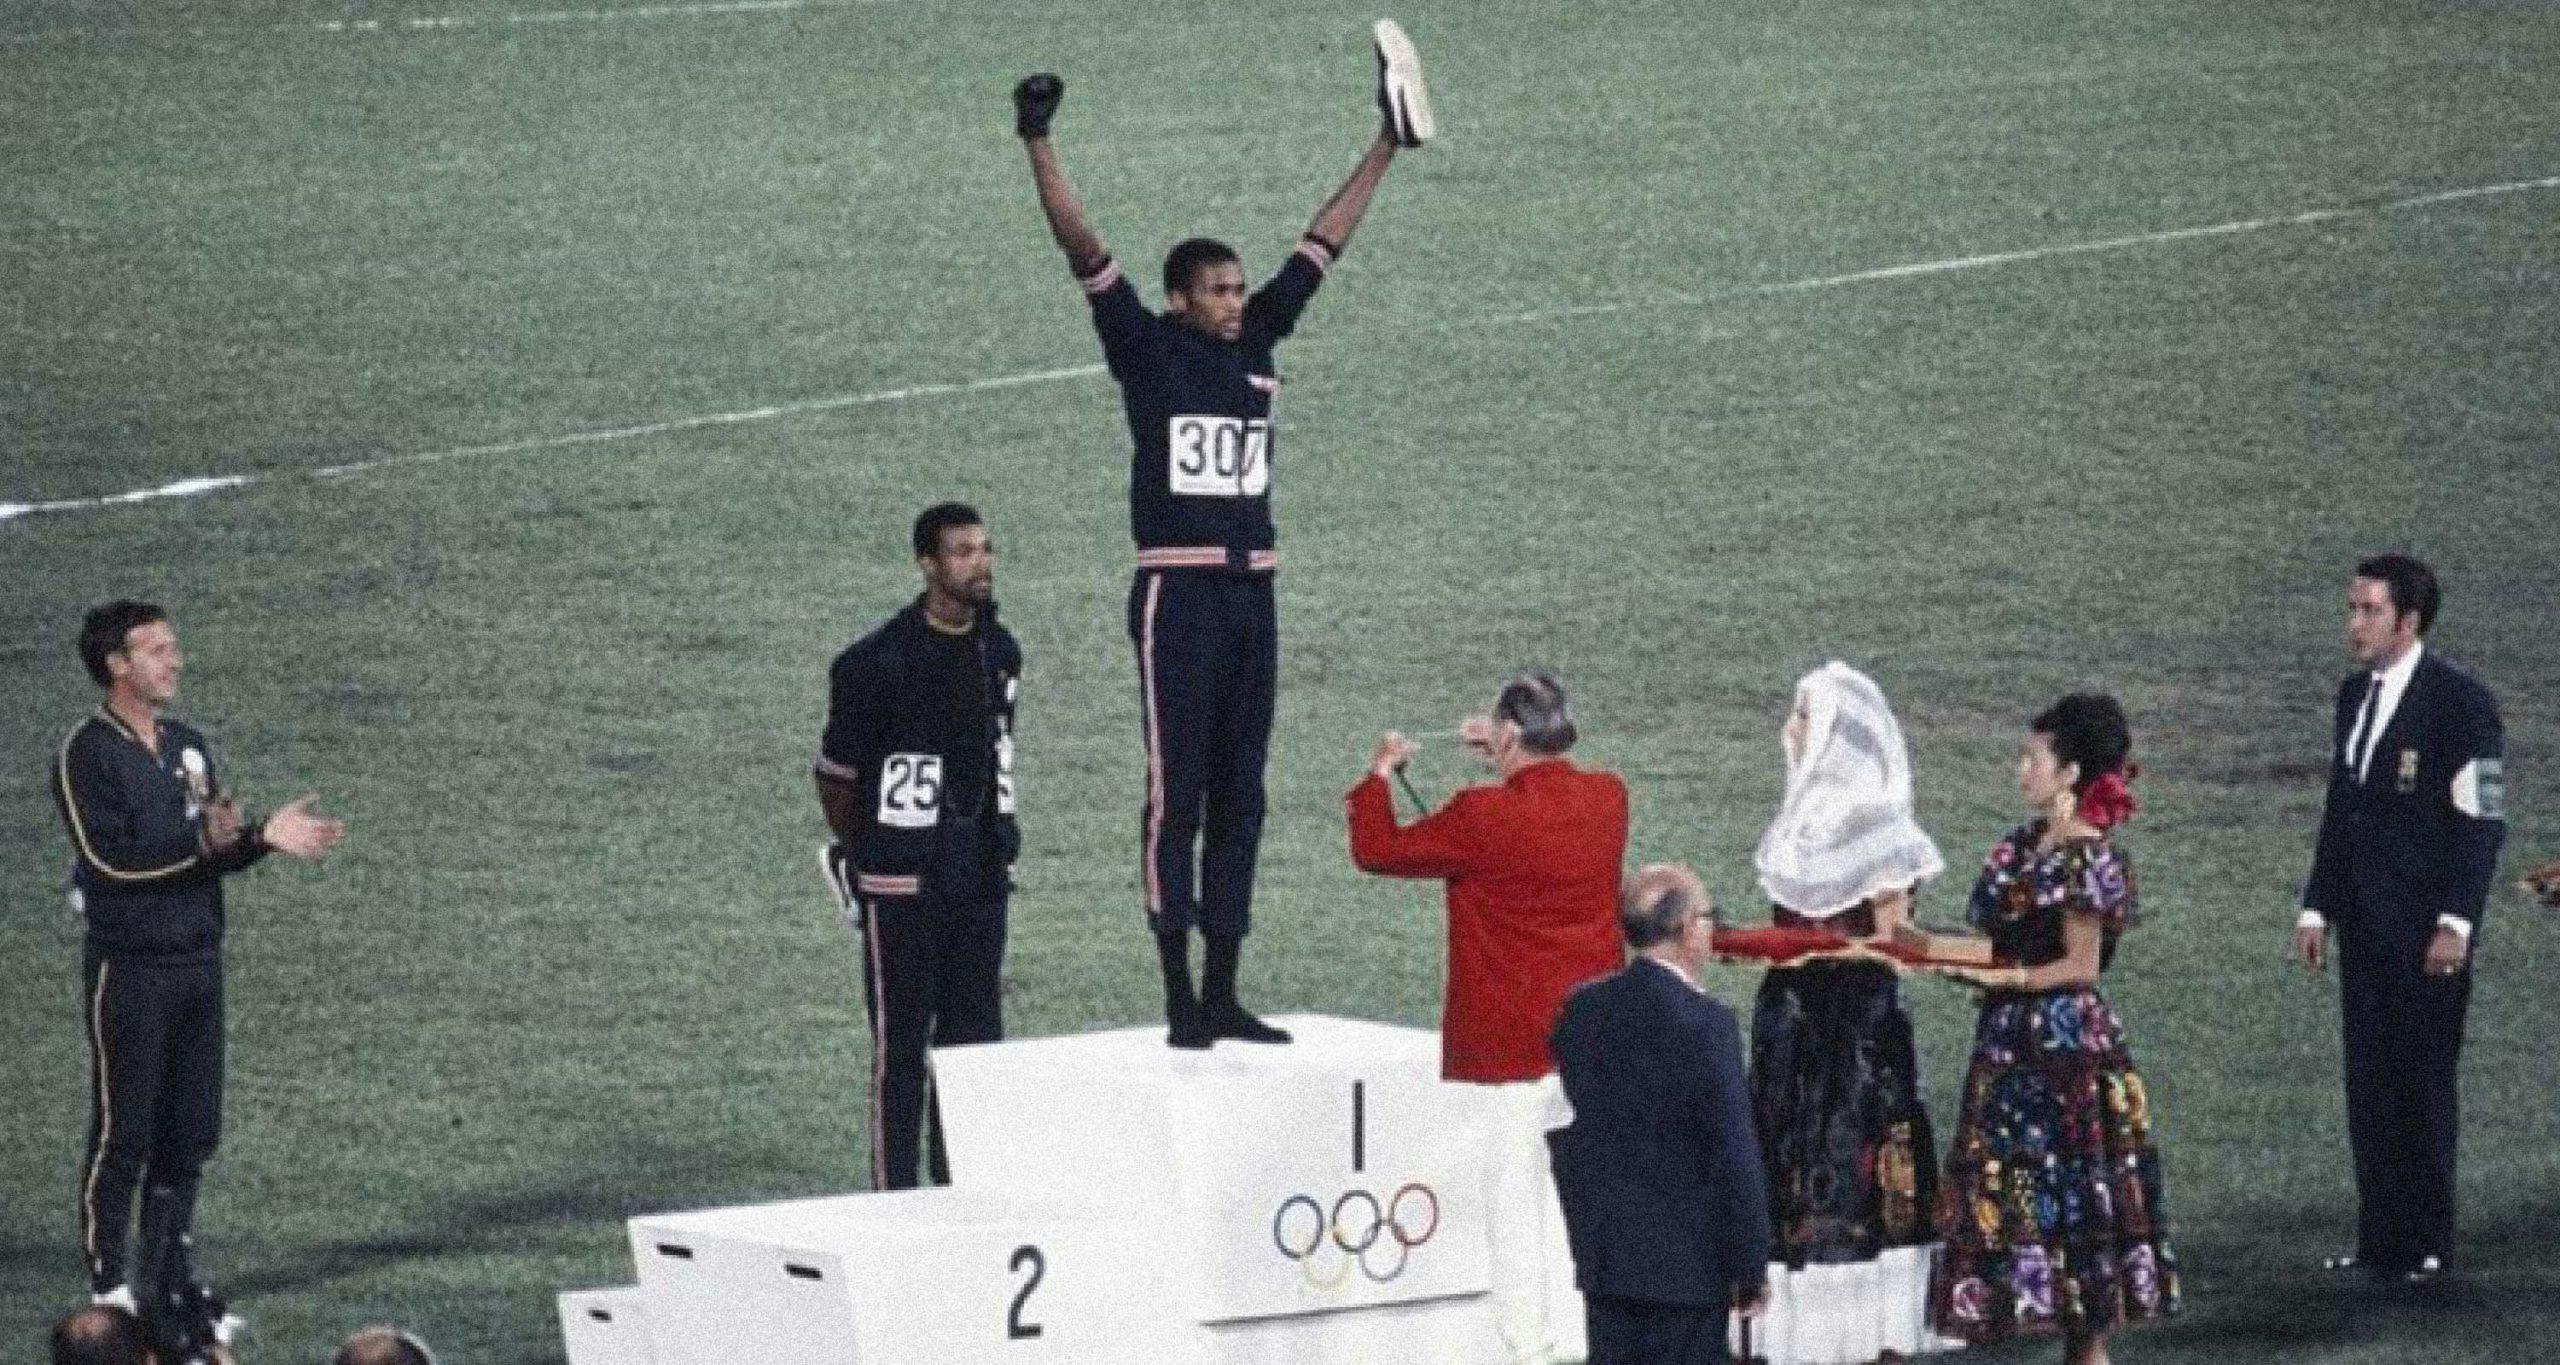 Tommie Smith and John Carlos making a defiant gesture from the awards podium at 1968 Olympics